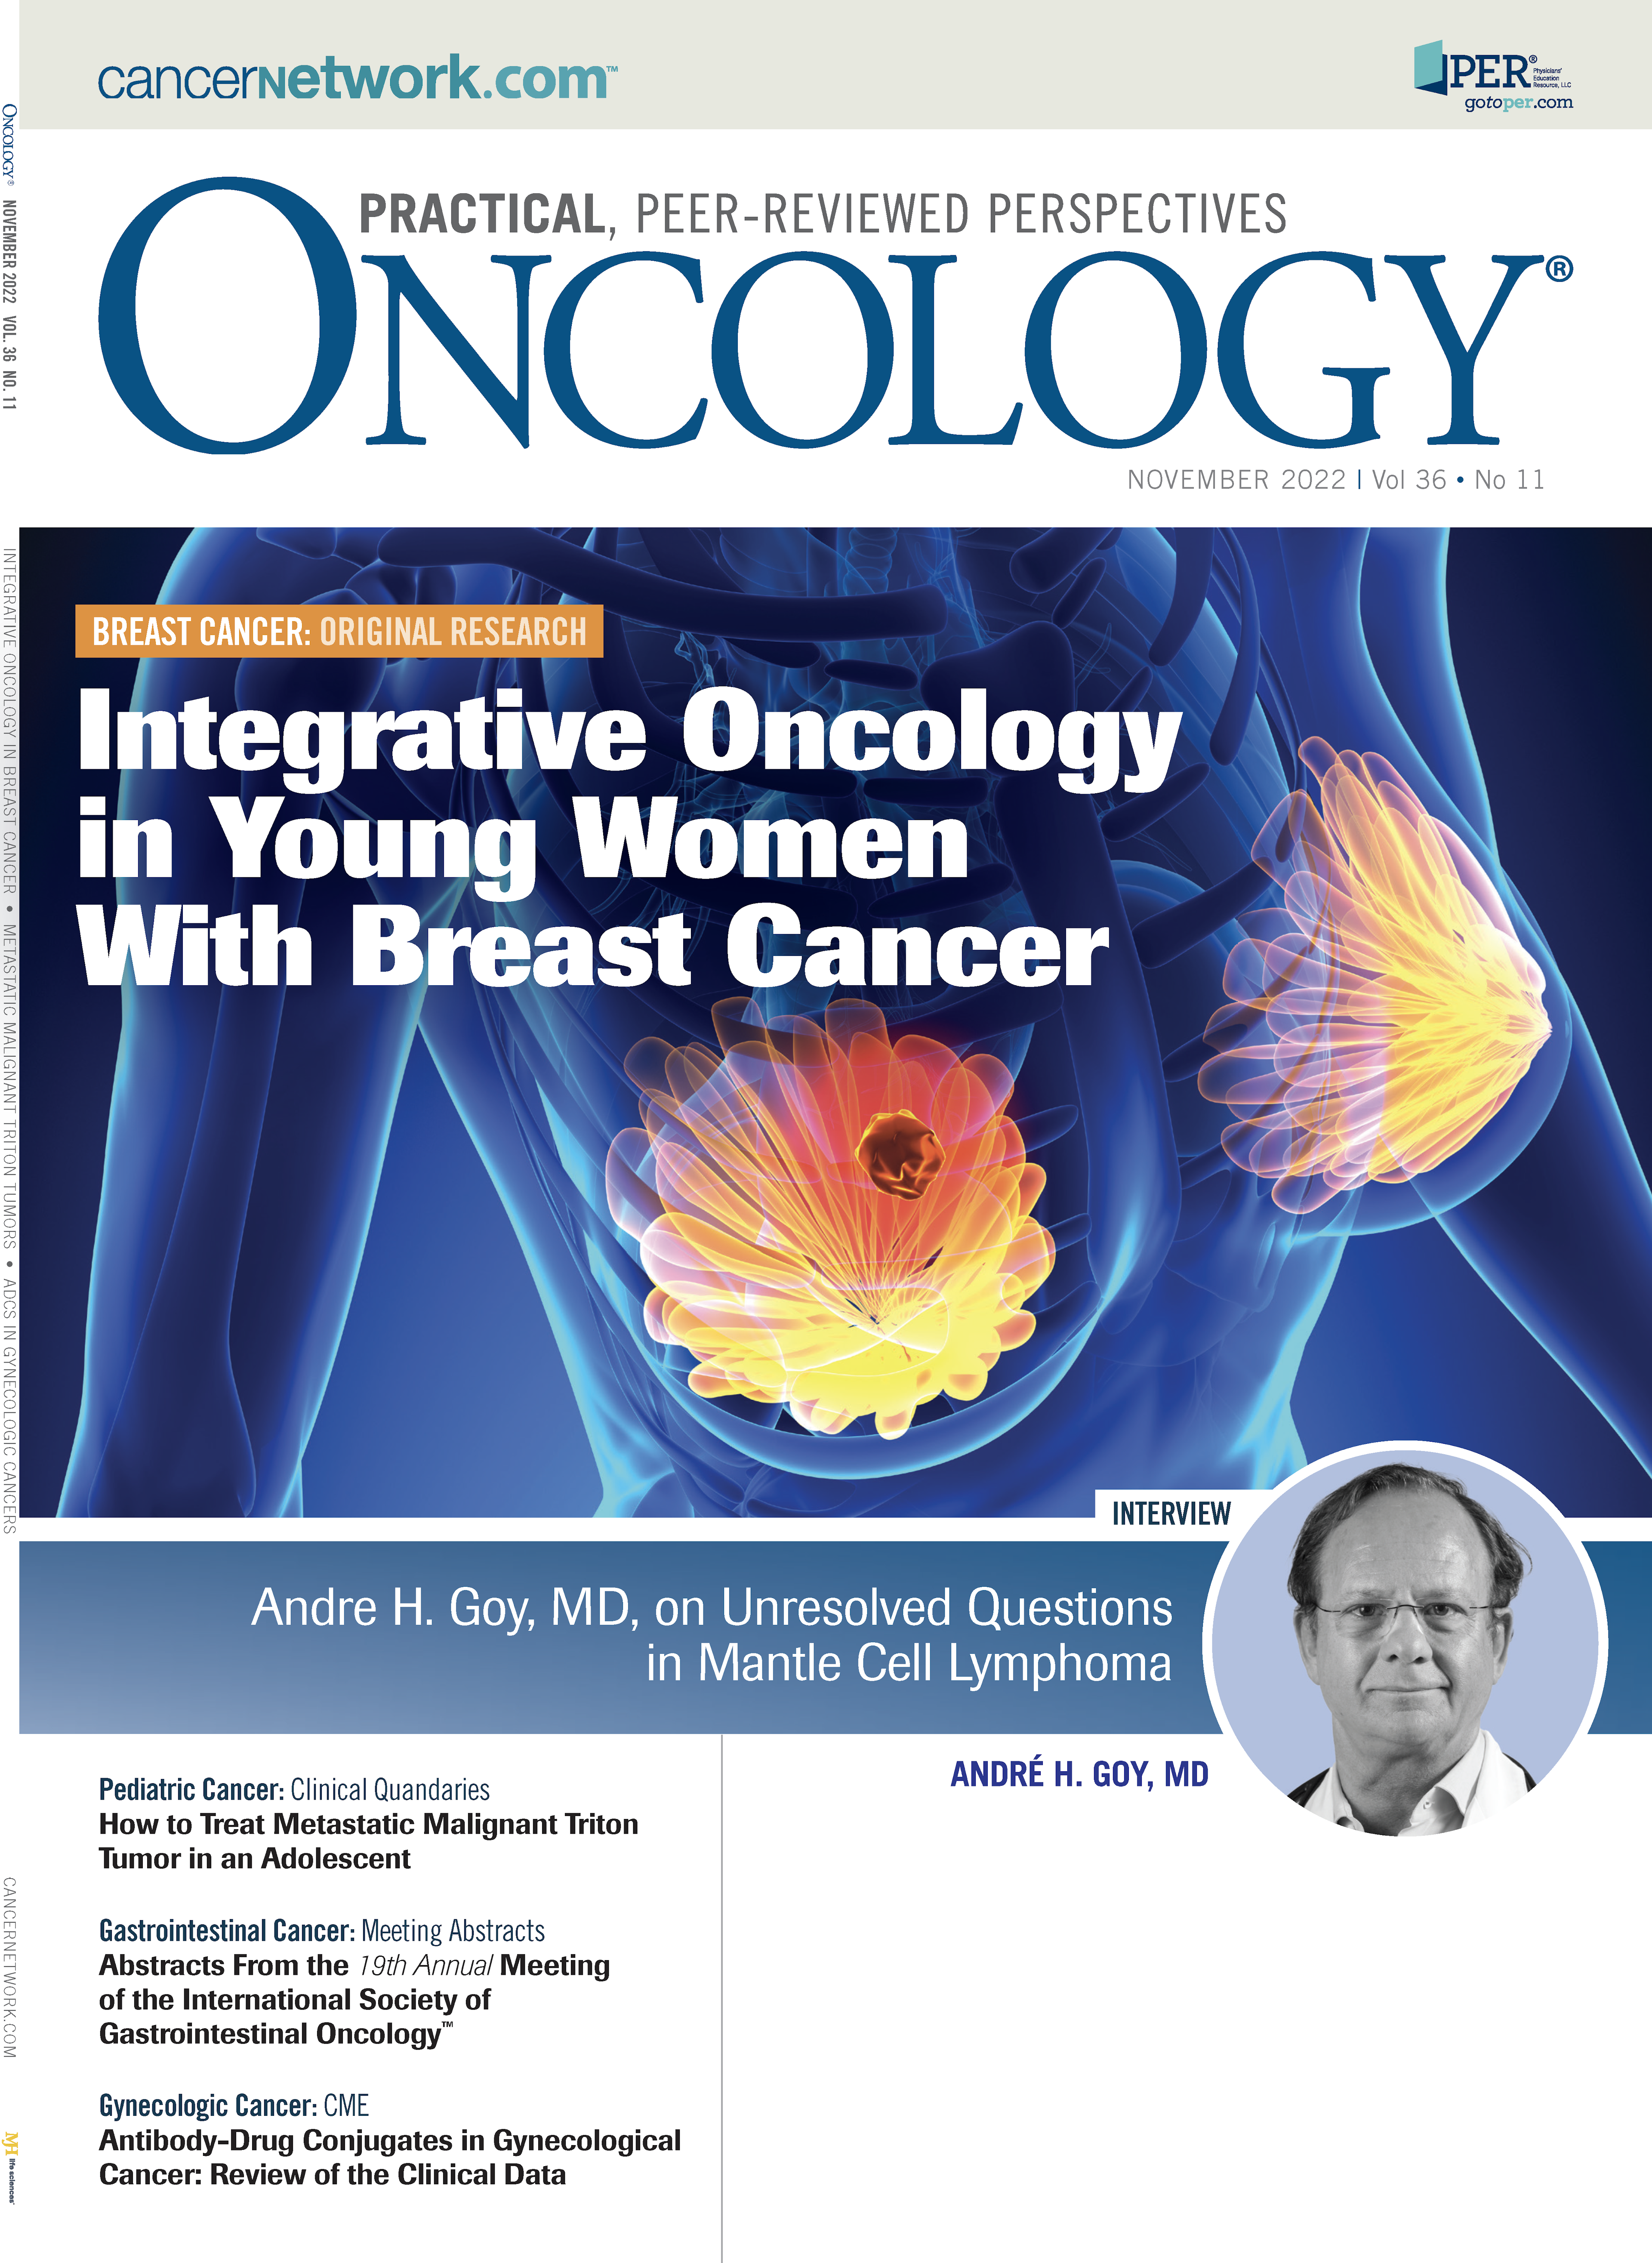 ONCOLOGY Vol 36, Issue 11